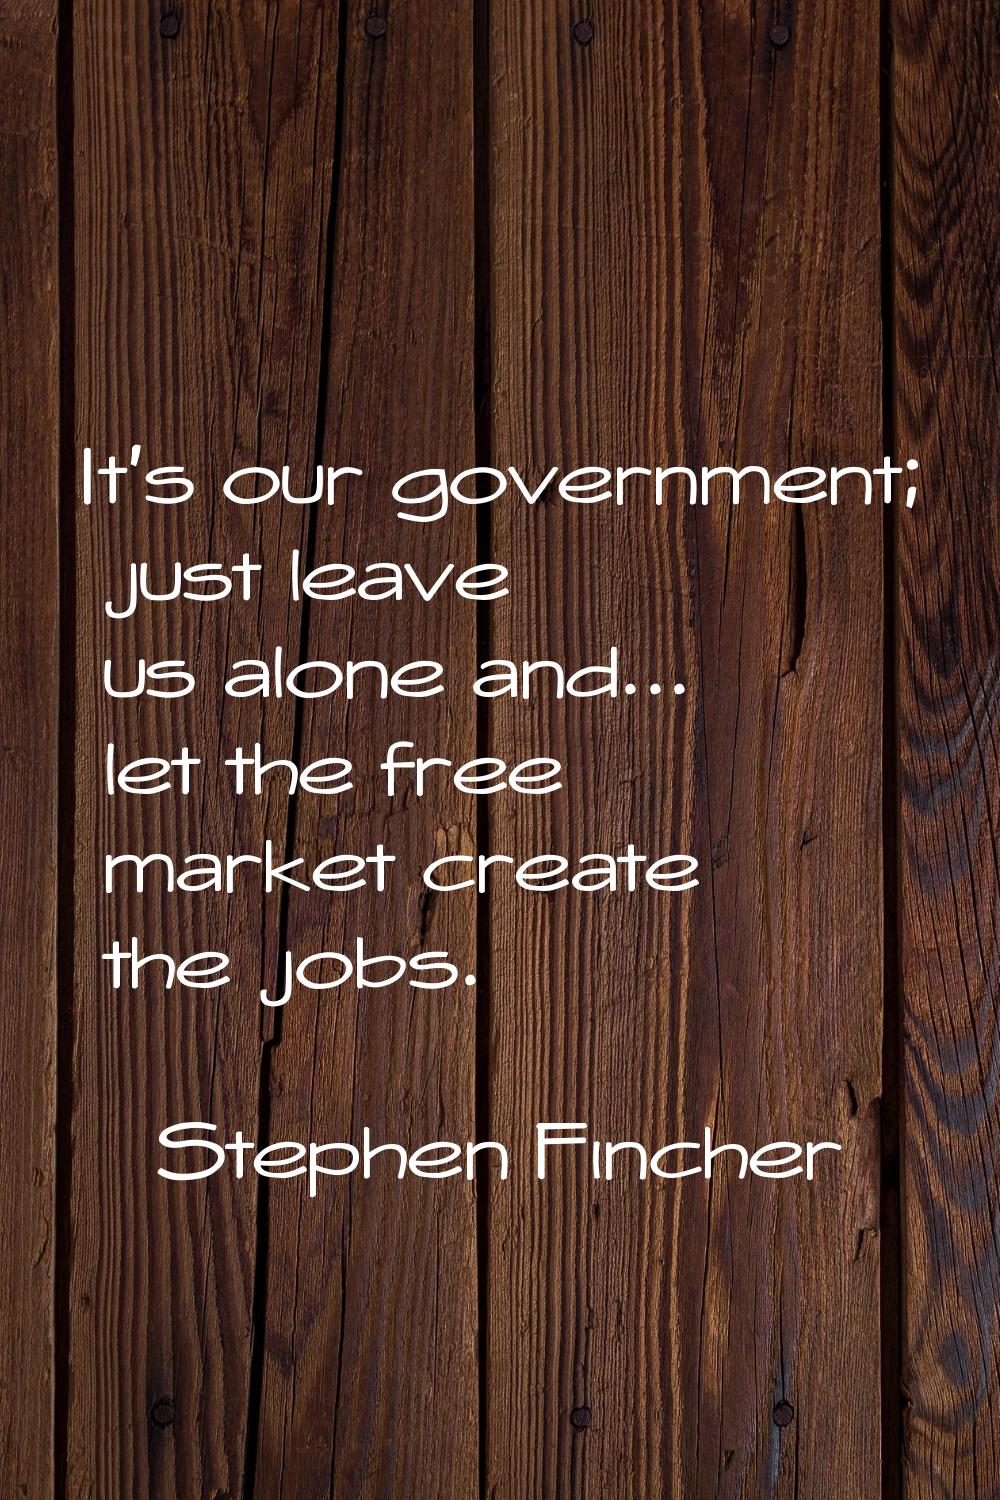 It's our government; just leave us alone and... let the free market create the jobs.